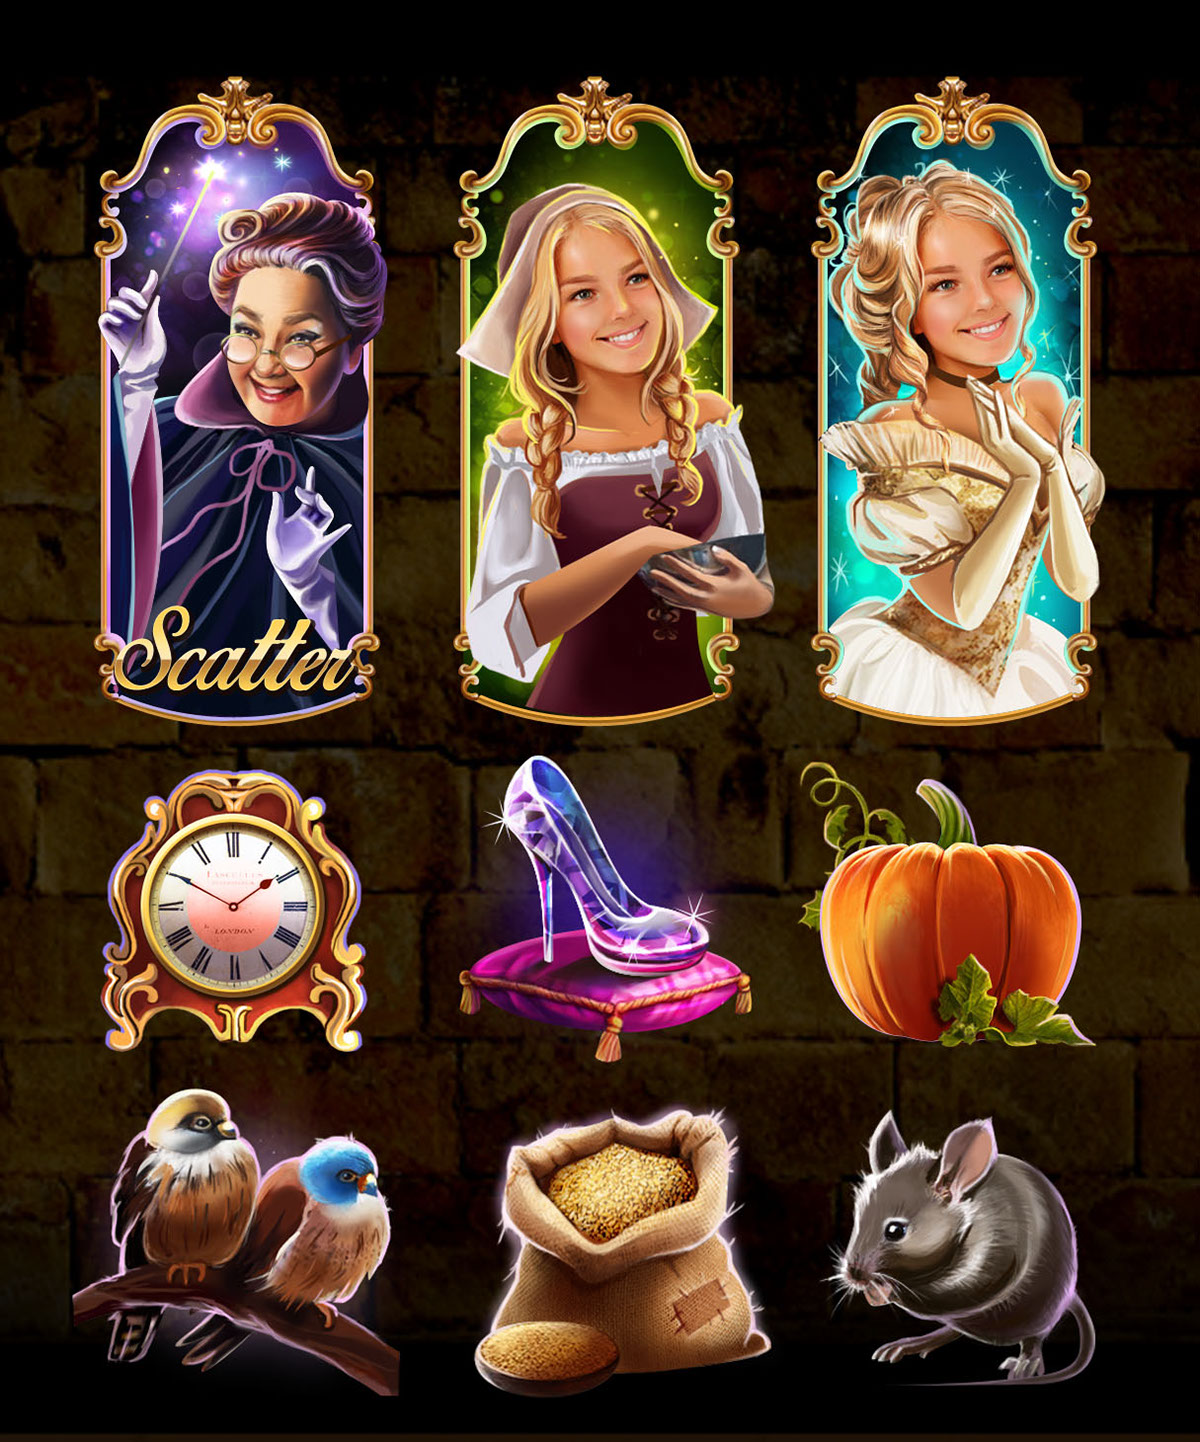 fairytale cinderella Glass Slipper Fairy Godmother slot game miracle